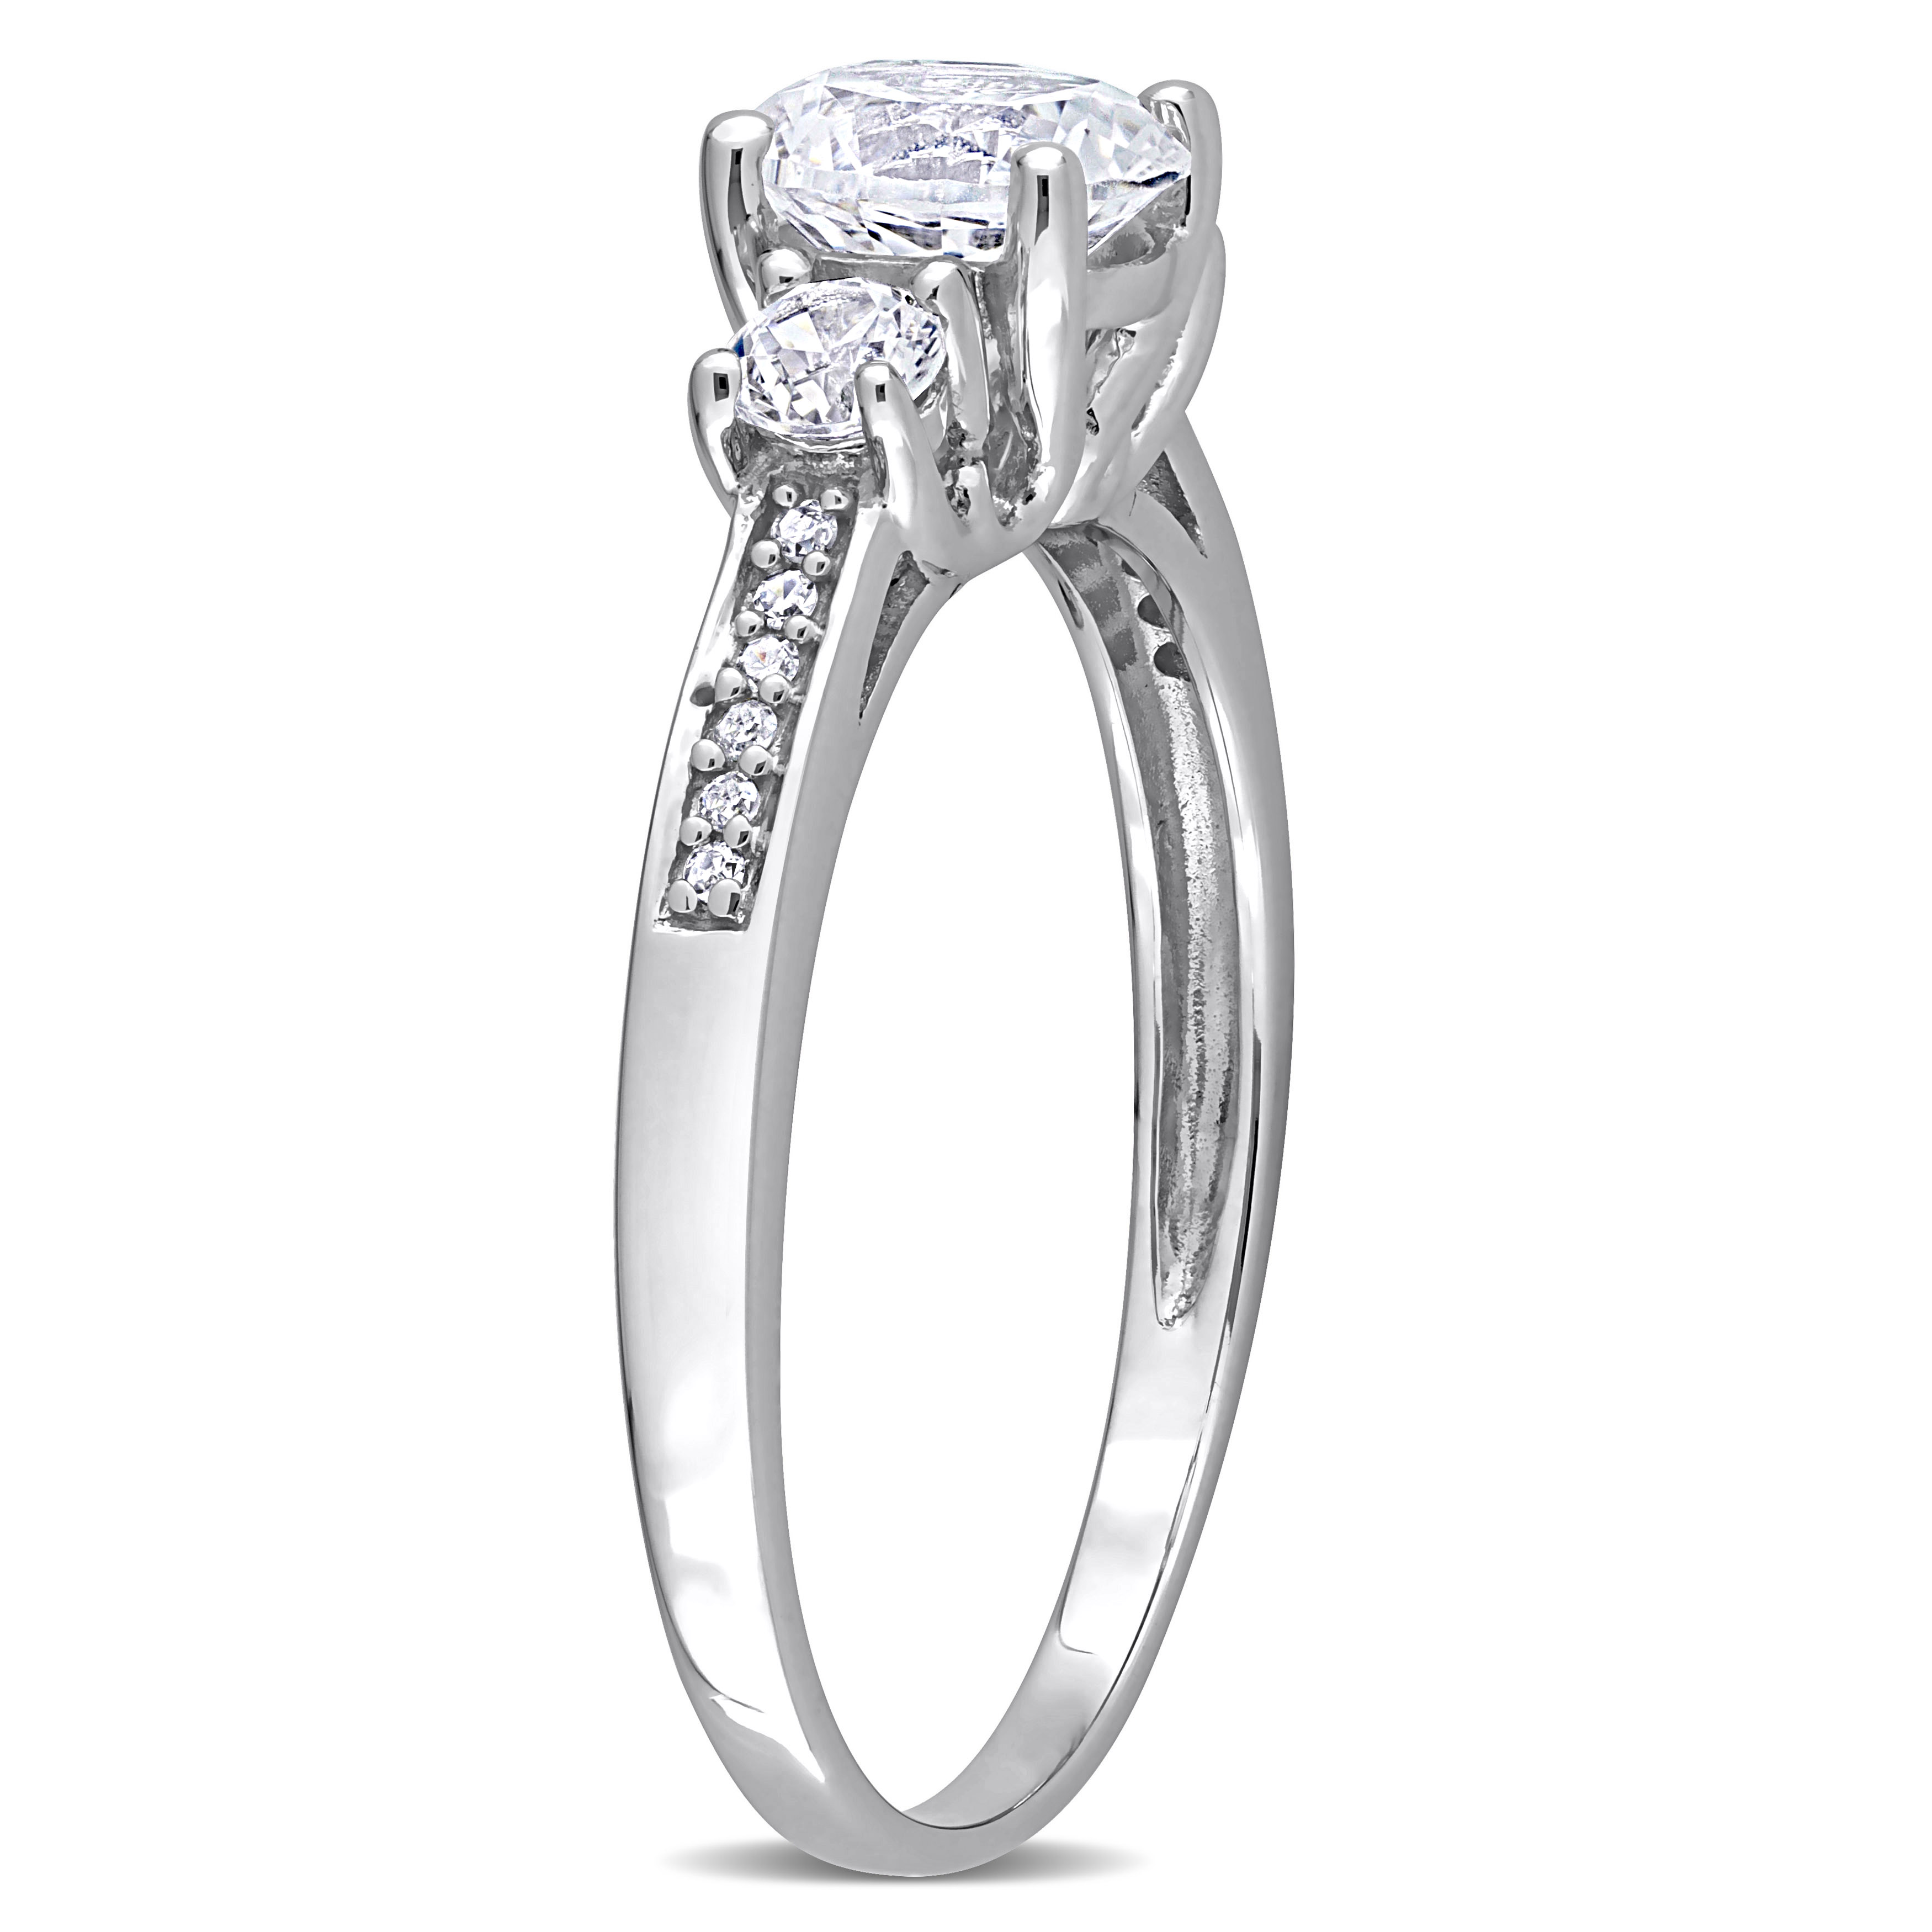 Everly Women's Engagement Anniversary Bridal 1 1/3 CT. Round Created White Sapphire Round-Cut Diamond Accent (G-H, I2-I3) 10kt White Gold 3-Stone Ring with 4 Prong/Pave Setting & Shoulder Diamonds - image 5 of 10